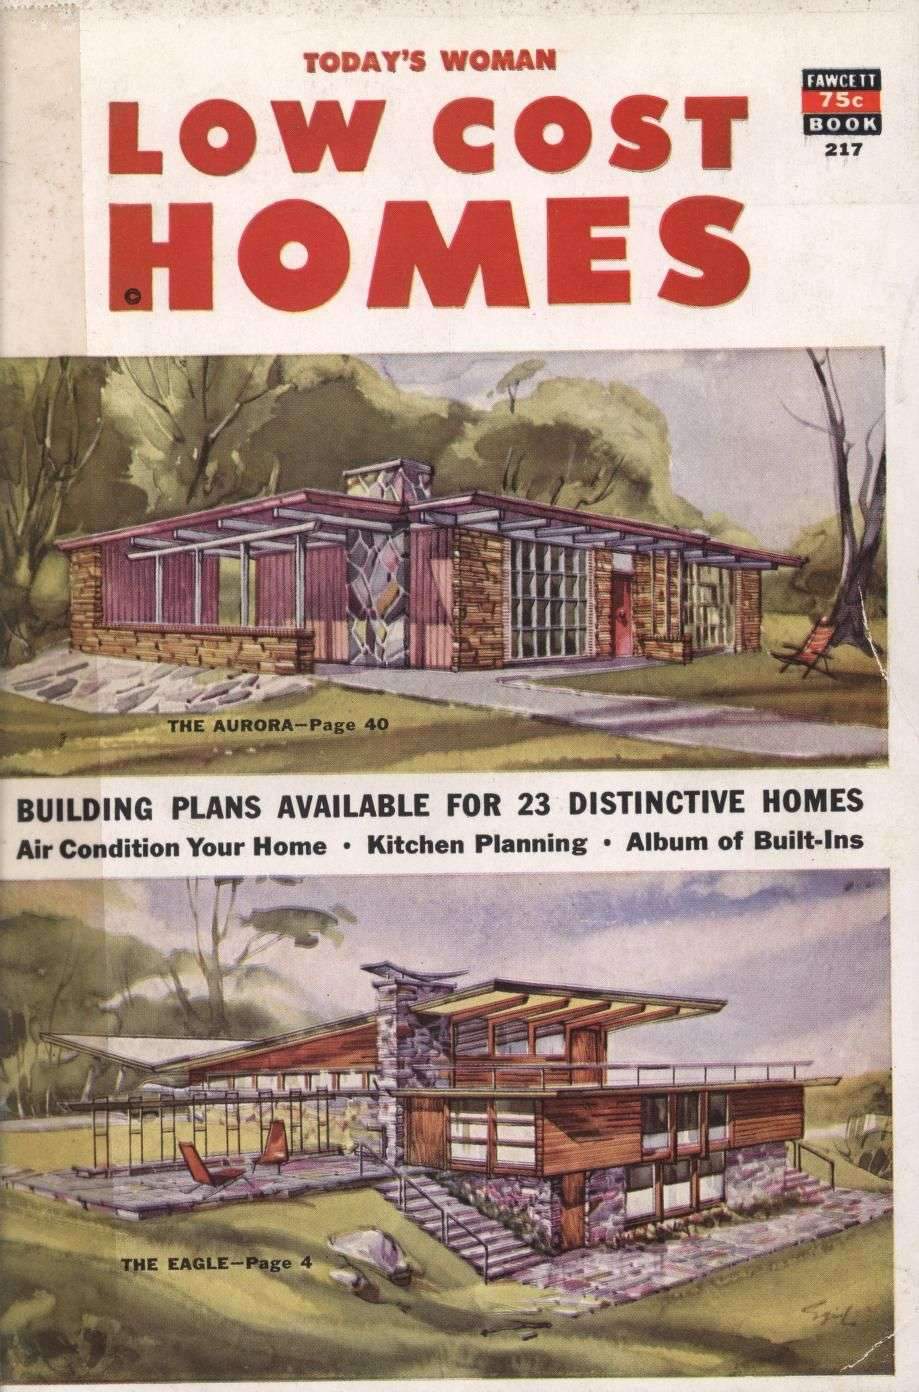 Today’s Woman Low Cost Homes, 1953. Fawcett Books From the Association for Preservation Technology…